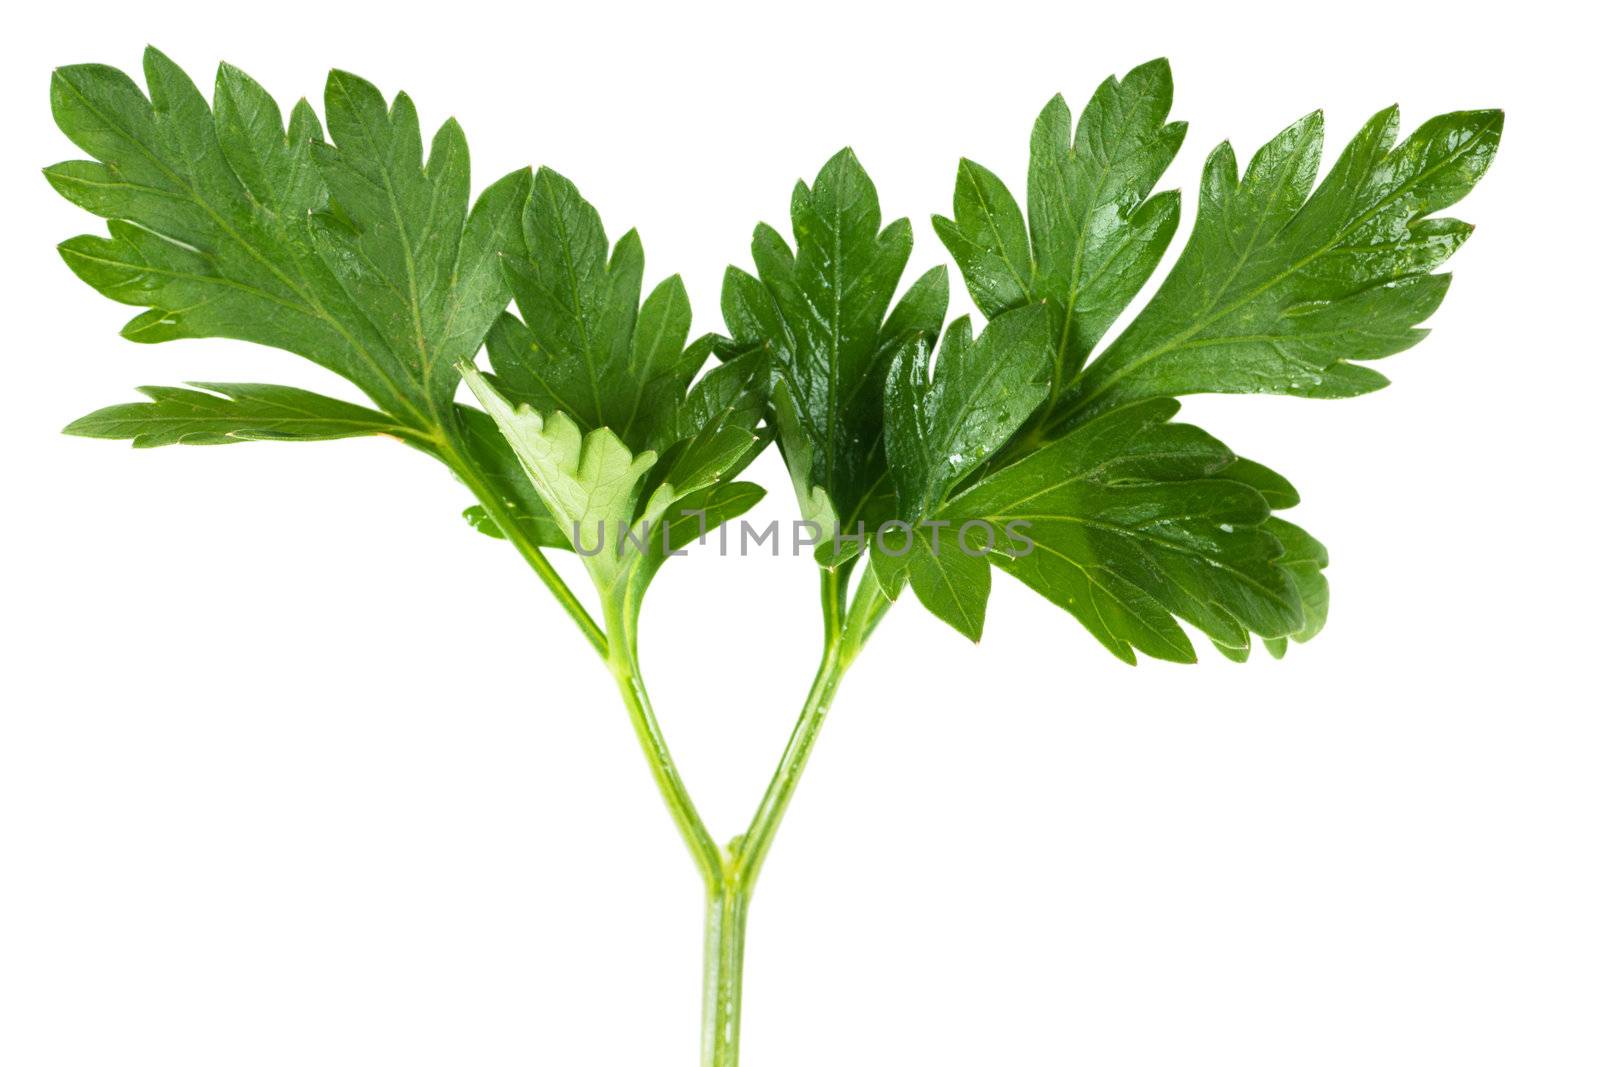 Macro view of fresh green parsley leaves isolated over white